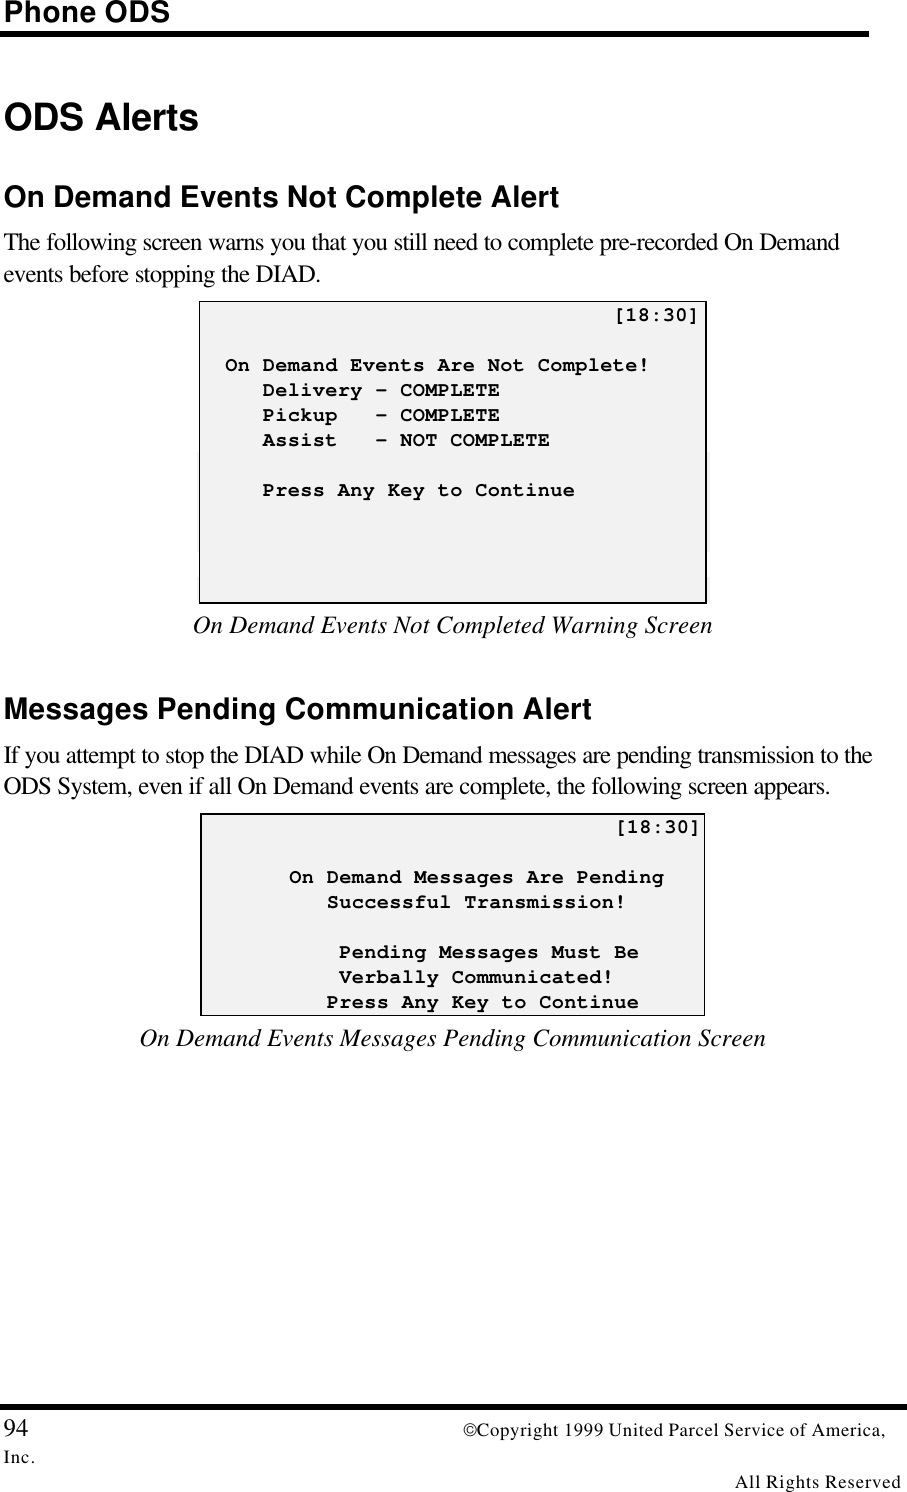 Phone ODS94 Copyright 1999 United Parcel Service of America,Inc.All Rights ReservedODS AlertsOn Demand Events Not Complete AlertThe following screen warns you that you still need to complete pre-recorded On Demandevents before stopping the DIAD.                                 [18:30]  On Demand Events Are Not Complete!     Delivery – COMPLETE     Pickup   - COMPLETE     Assist   - NOT COMPLETE     Press Any Key to ContinueOn Demand Events Not Completed Warning ScreenMessages Pending Communication AlertIf you attempt to stop the DIAD while On Demand messages are pending transmission to theODS System, even if all On Demand events are complete, the following screen appears.                                 [18:30]       On Demand Messages Are Pending          Successful Transmission!           Pending Messages Must Be           Verbally Communicated!          Press Any Key to ContinueOn Demand Events Messages Pending Communication Screen